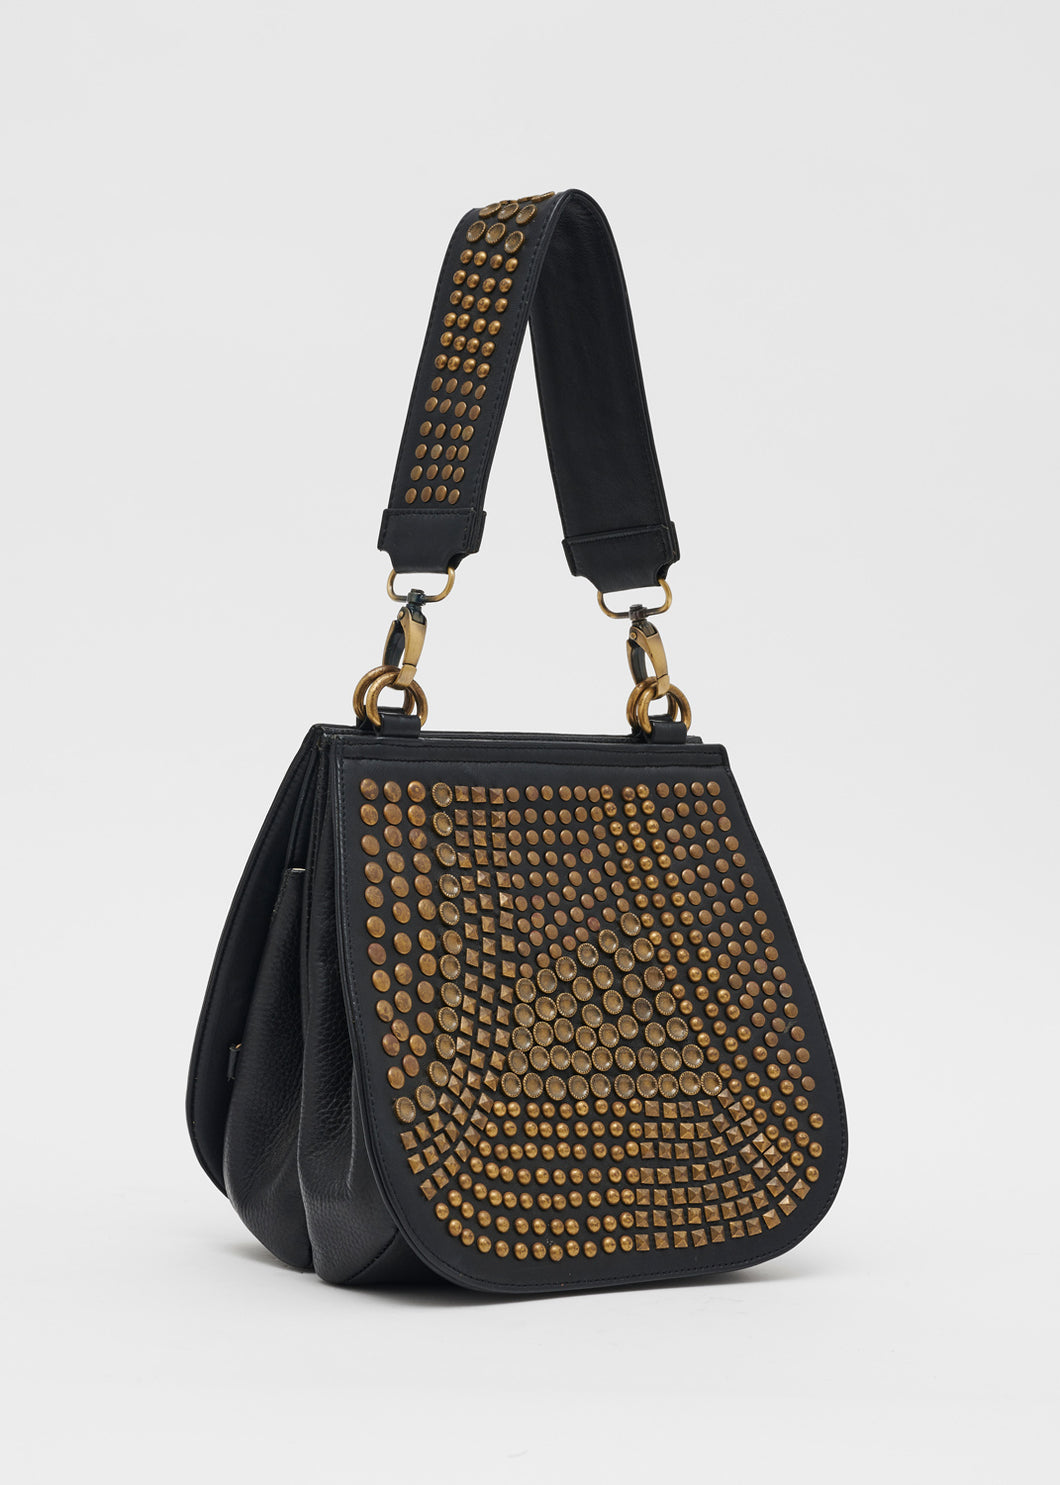 Double_Sided_Saddle_Bag_in_Black_and_Brass